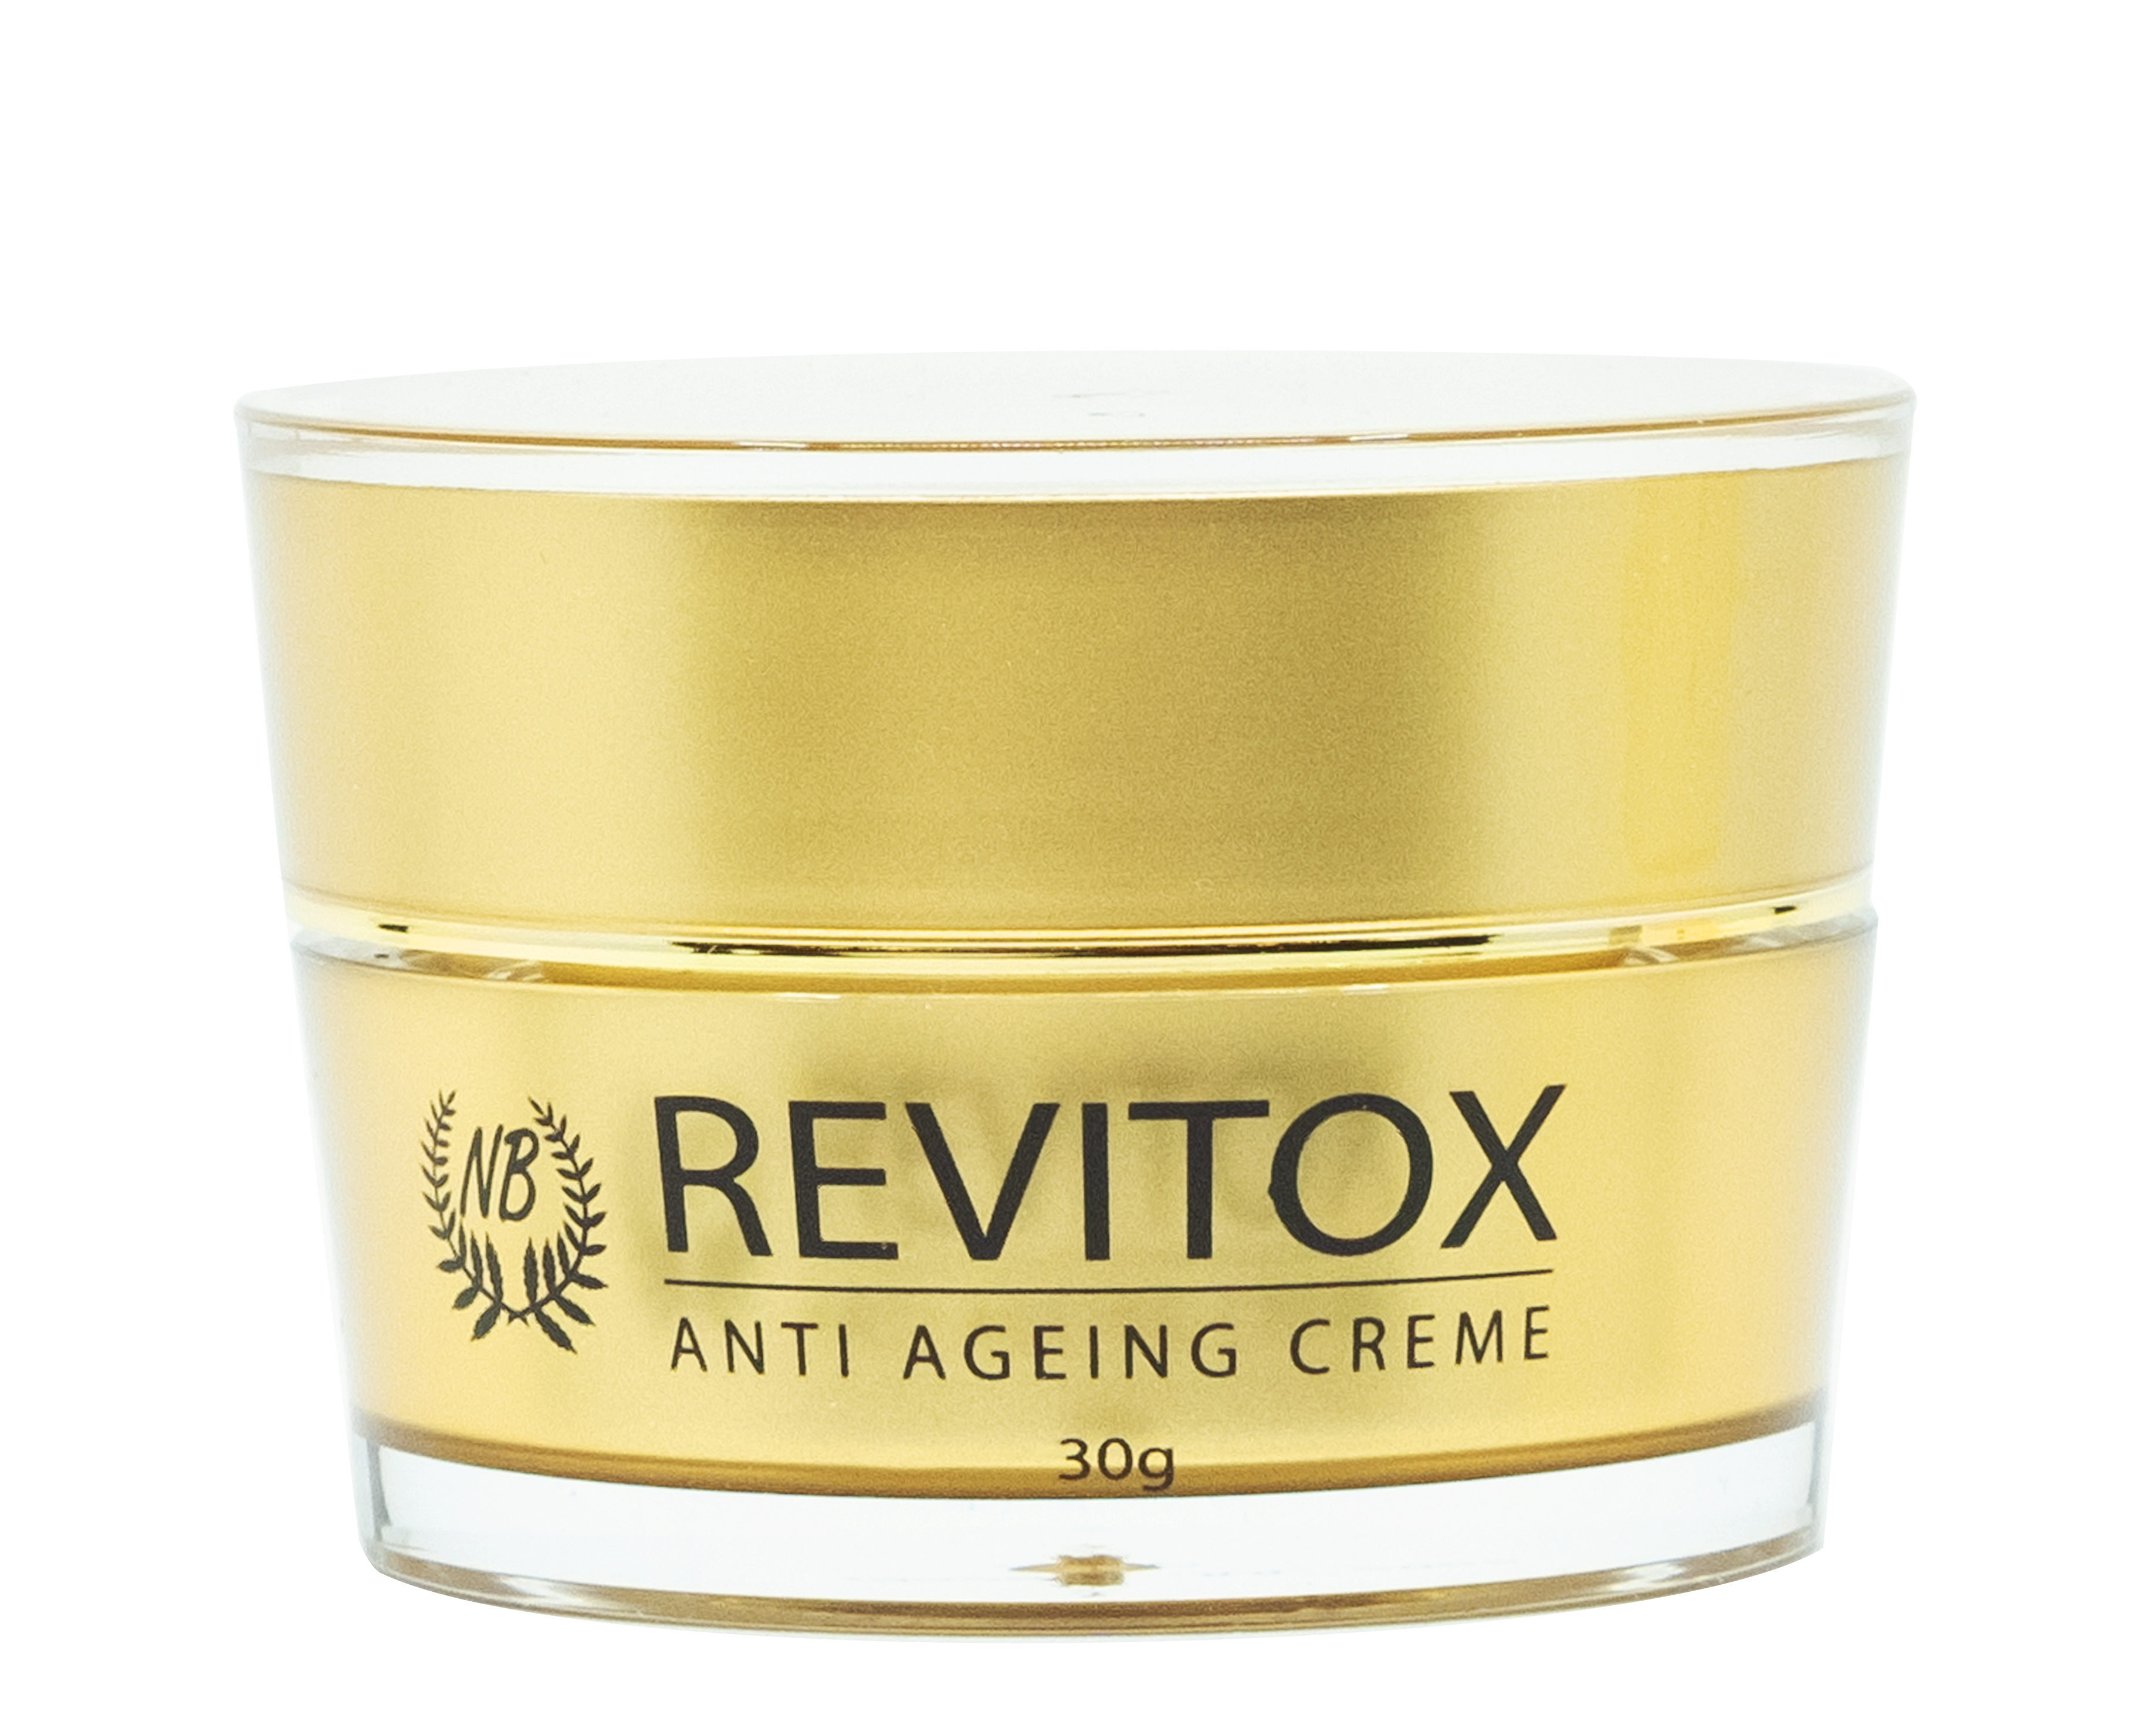 Nature's Beauty Revitox Anti-Ageing Creme 30g - 365 Health Limited